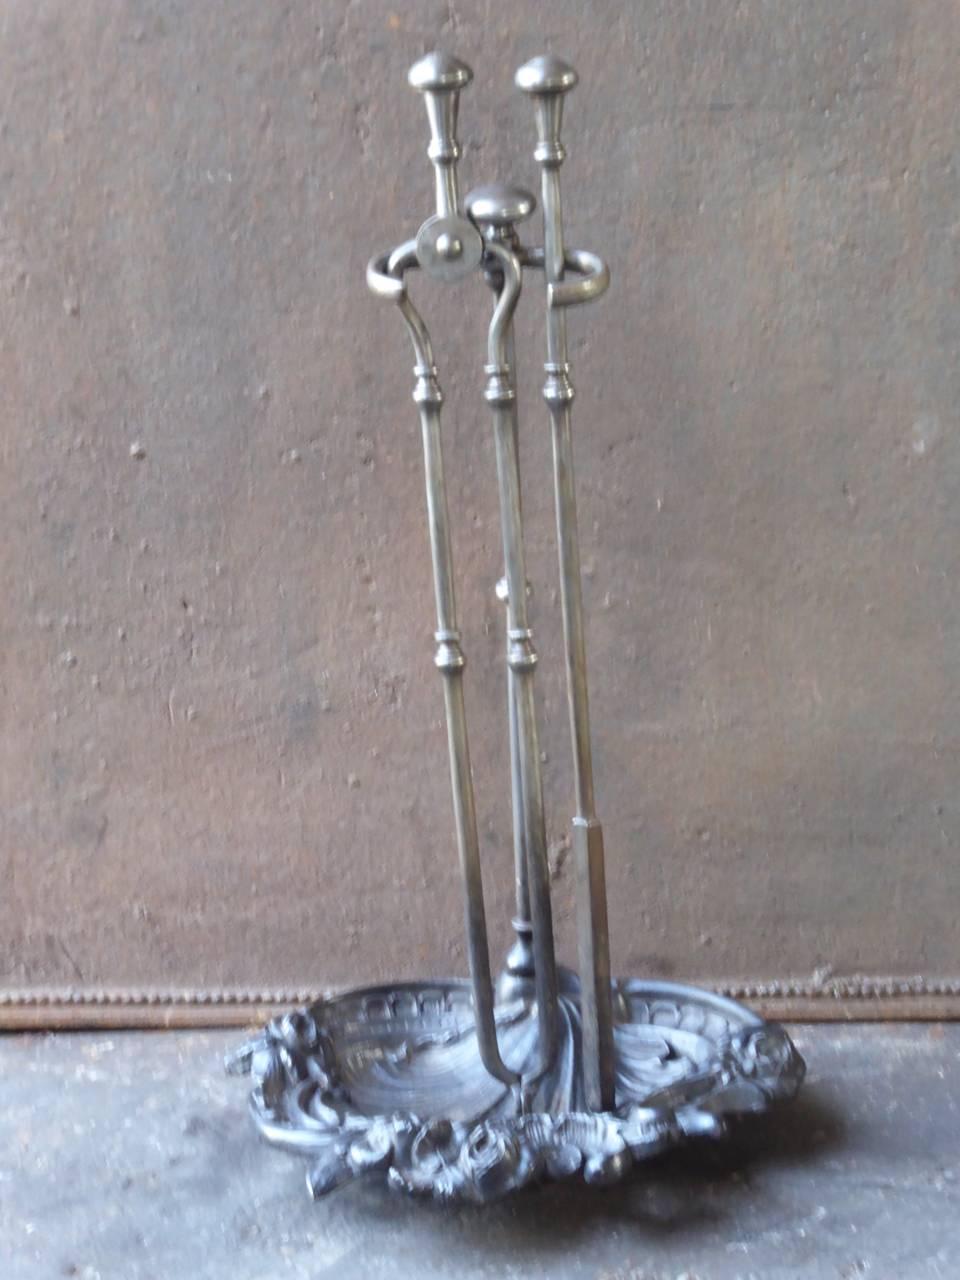 Late 18th or early 19th century English fireplace tool set - fire irons made of polished steel and cast iron. The style is Georgian and it is from that period. The condition is good.

